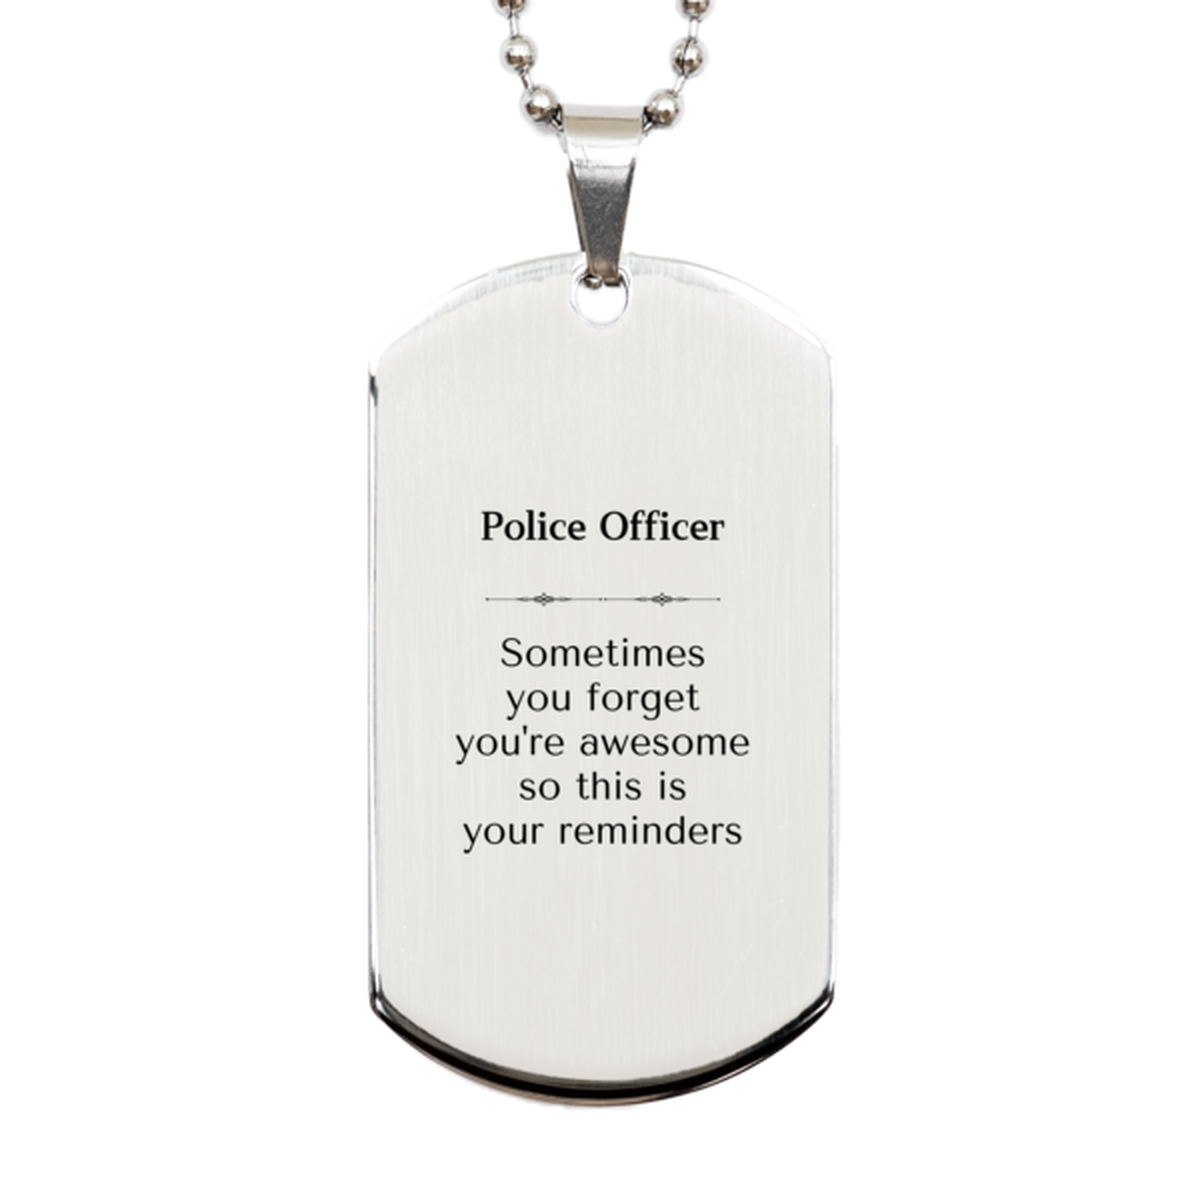 Sentimental Police Officer Silver Dog Tag, Police Officer Sometimes you forget you're awesome so this is your reminders, Graduation Christmas Birthday Gifts for Police Officer, Men, Women, Coworkers